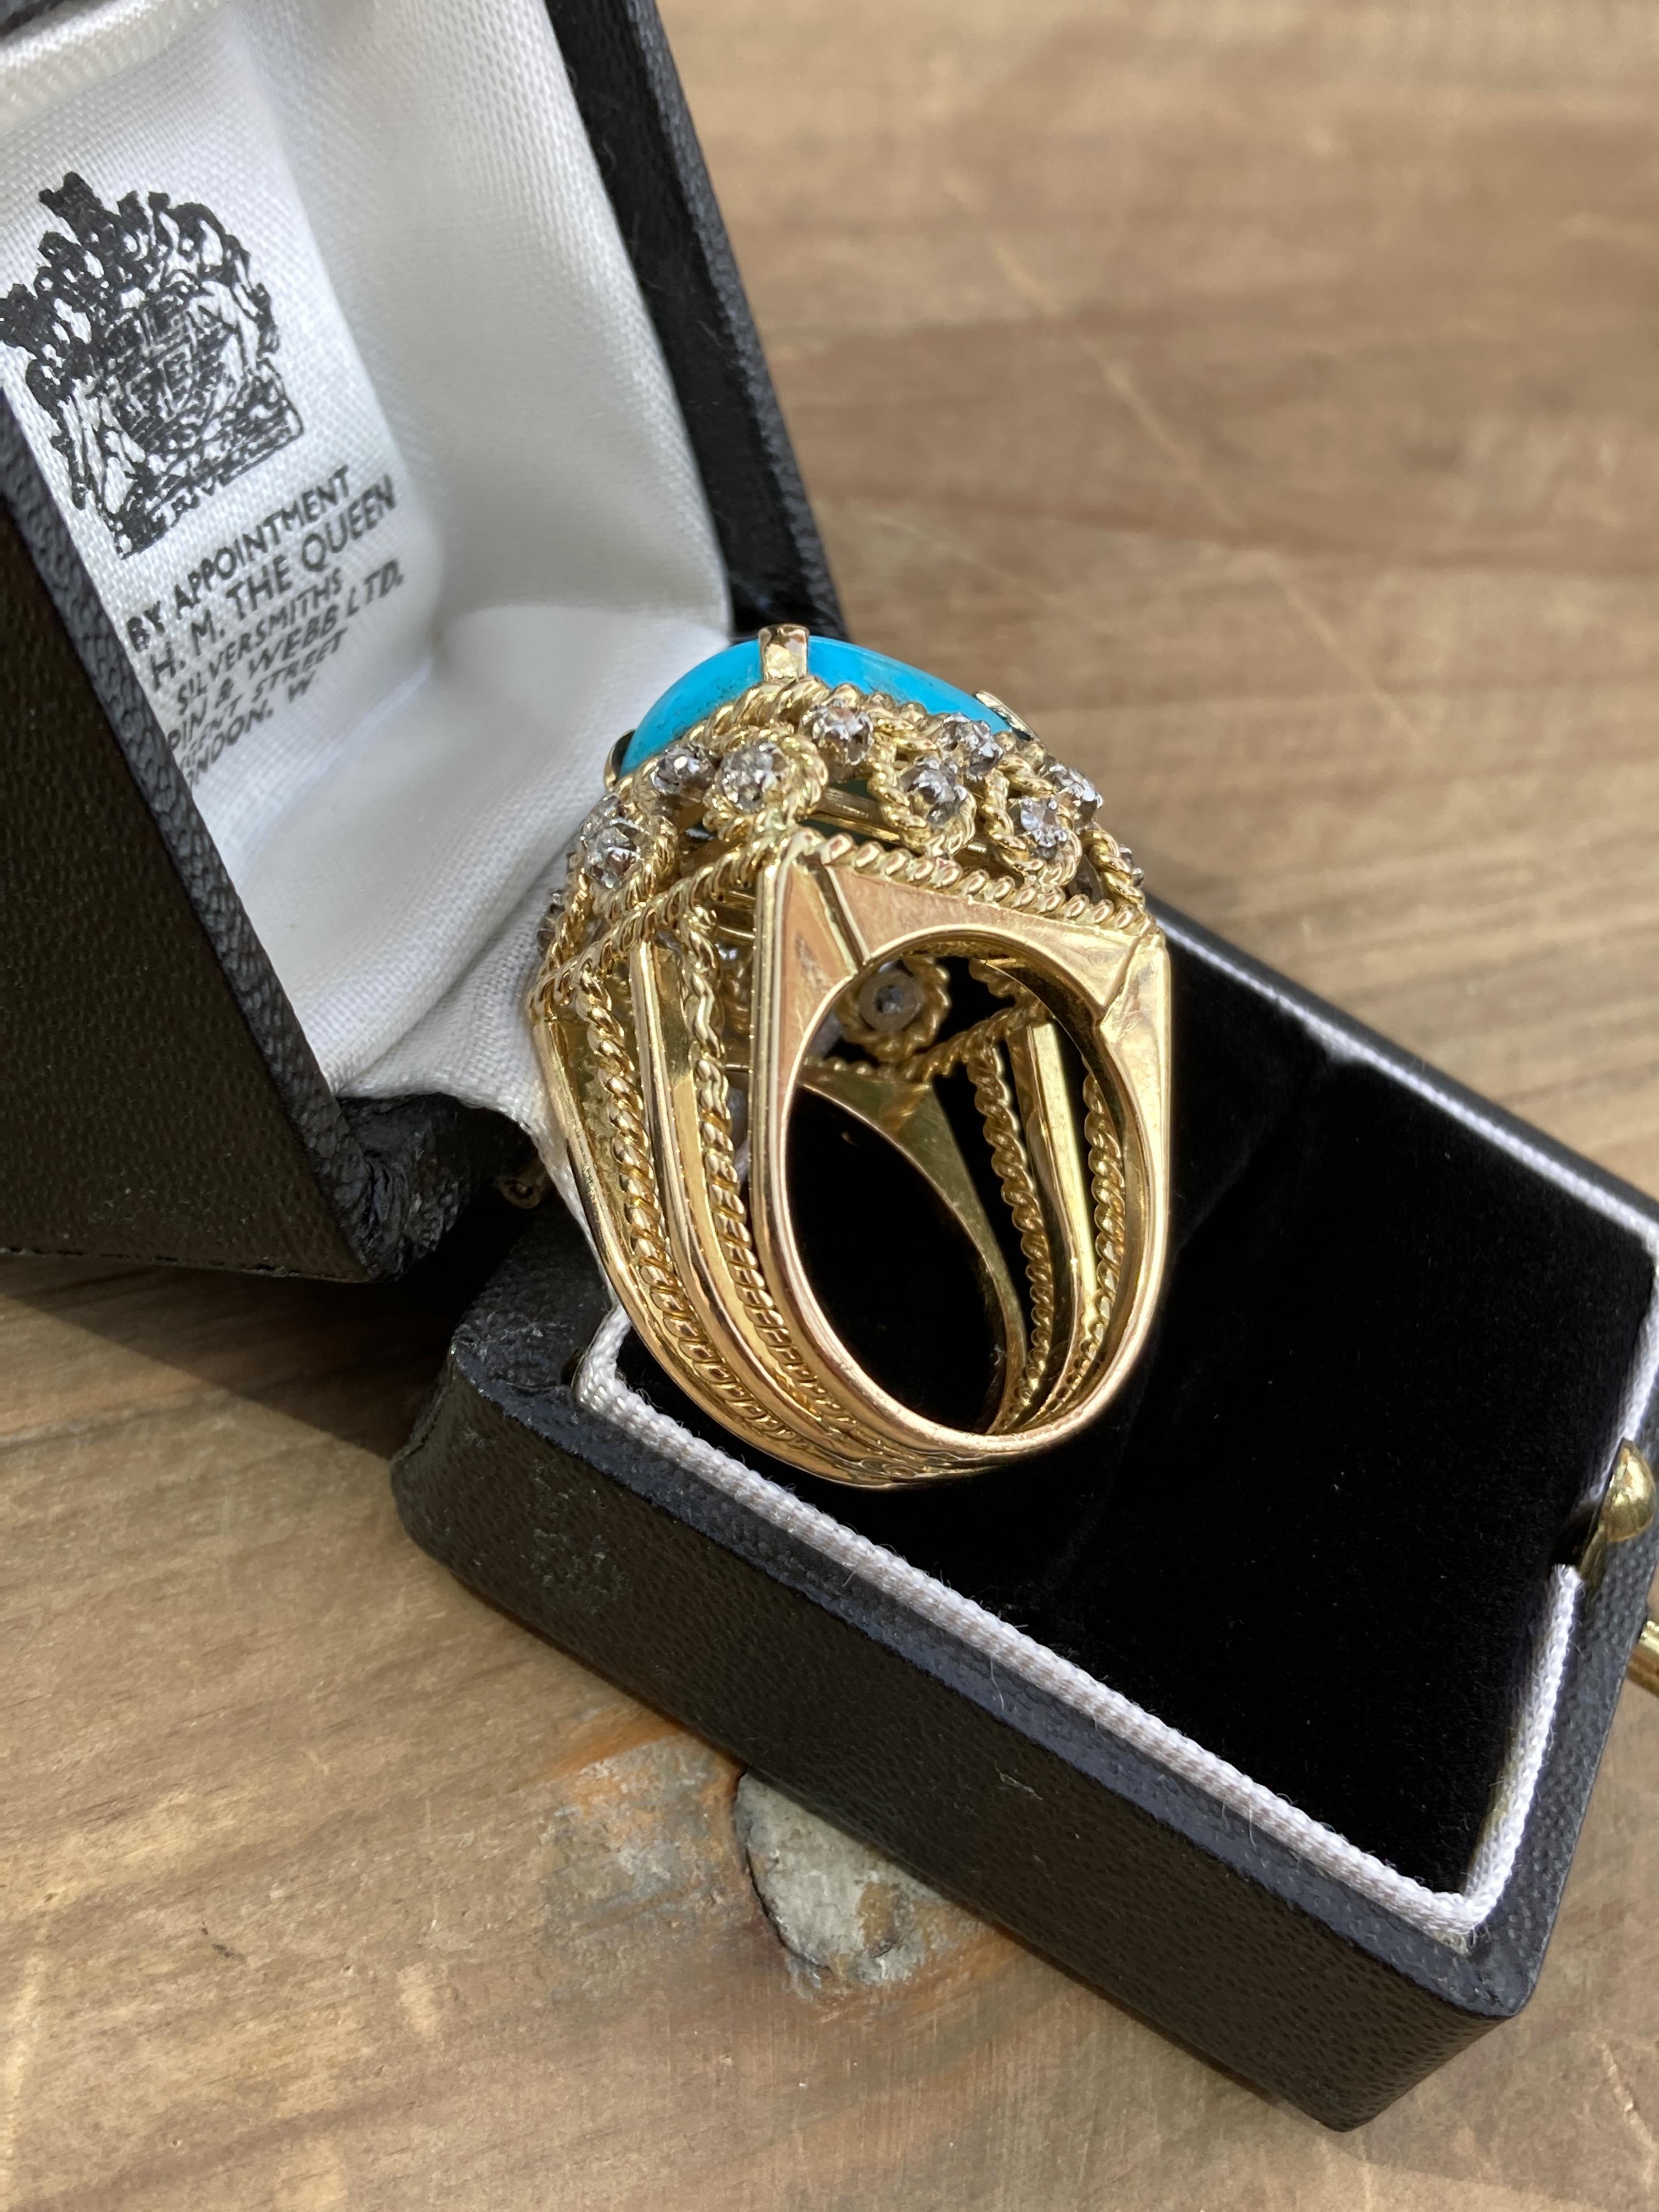 19G 18CT YELLOW GOLD TURQUOISE & DIAMOND COCKTAIL RING - Image 6 of 6